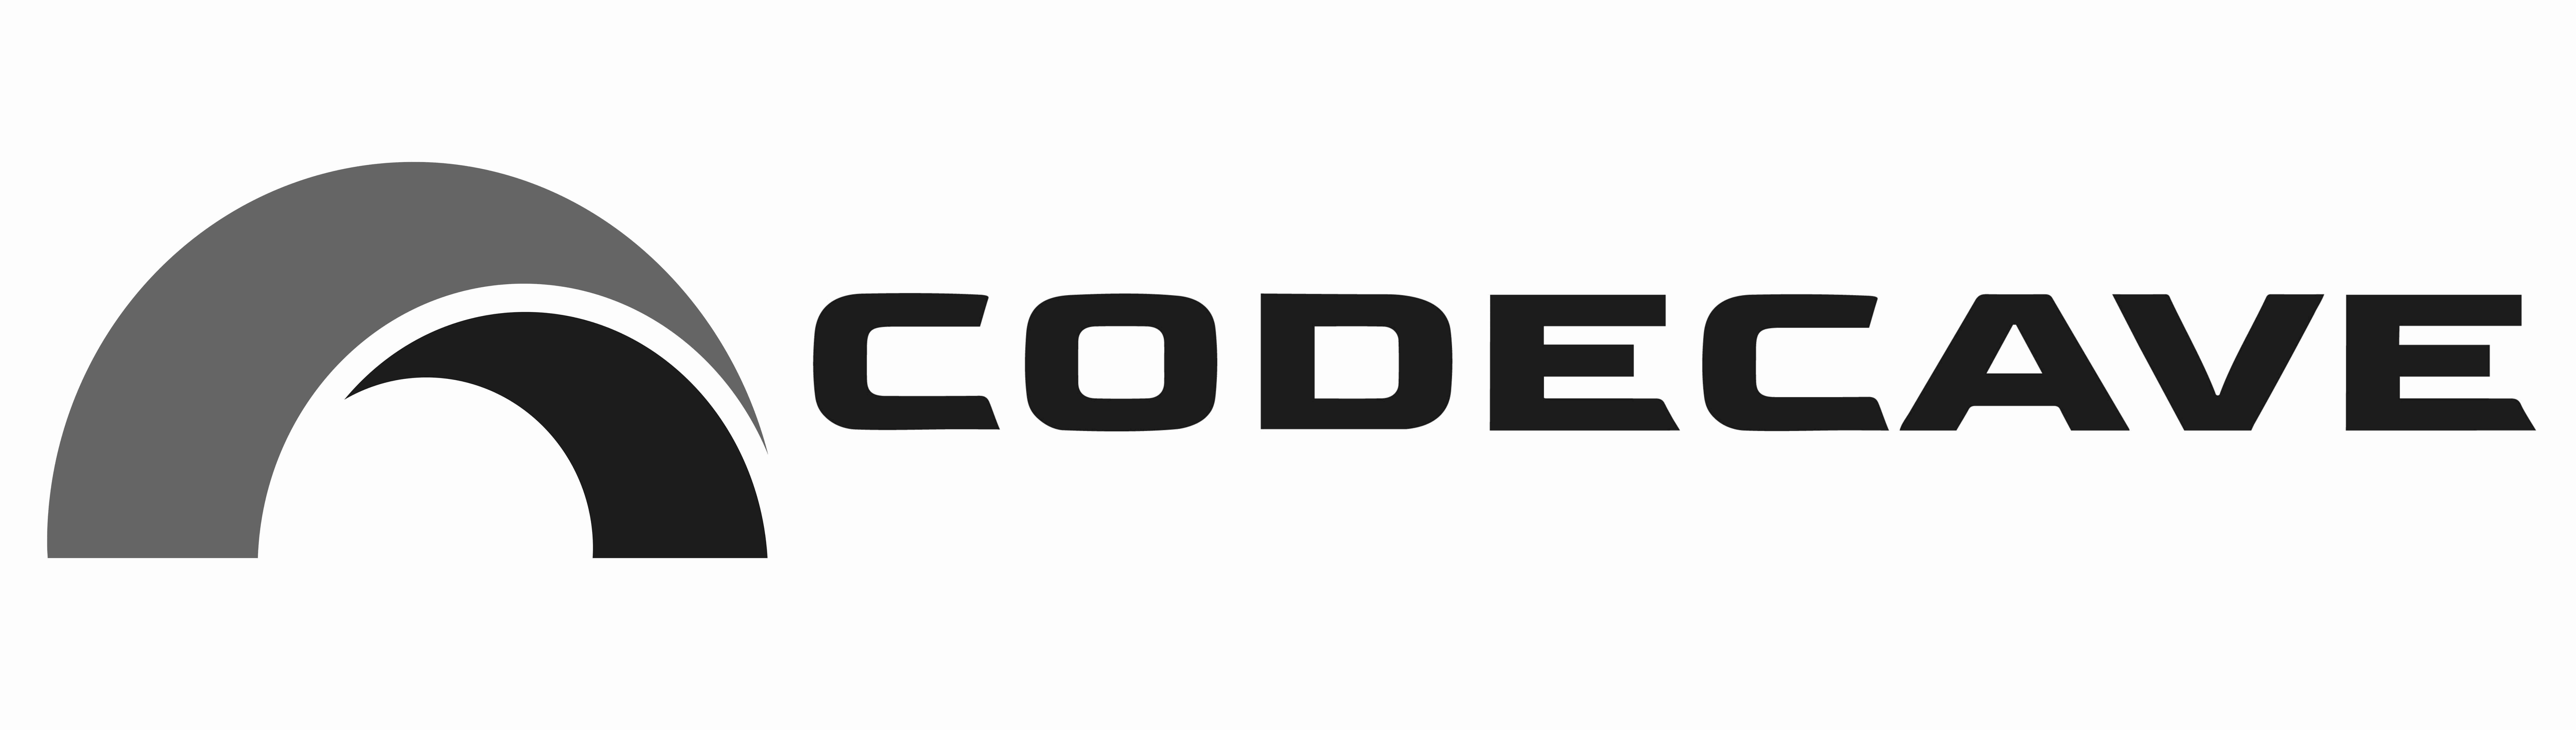 CODECAVE